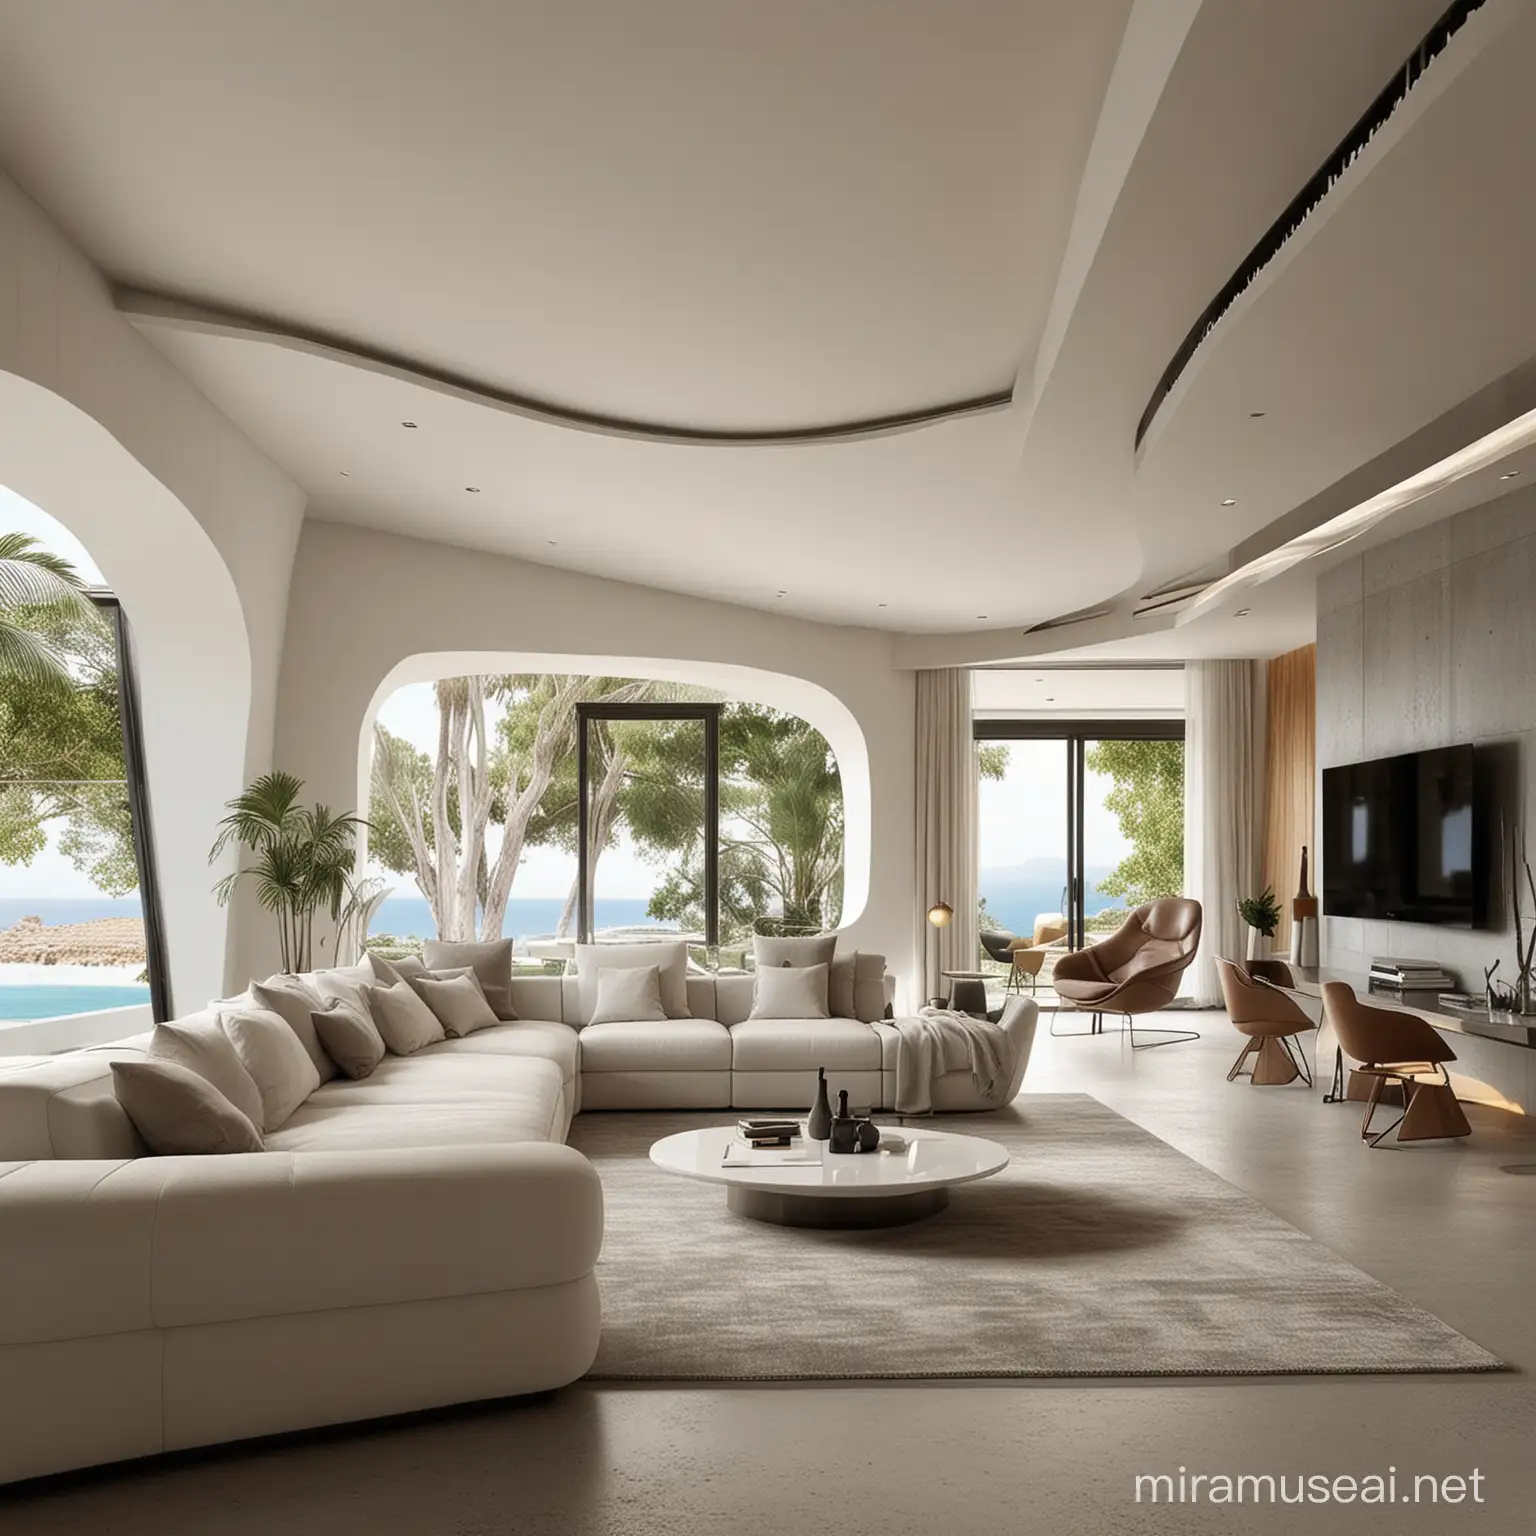 a tropical Sicily living room#influenced by the works of Zaha Hadid#Newcollection#architecturetravel #architecturebuilding#newstyl#tredy#livingroom#interiordesign#aiprompts#archdaily#aiinteriordesign#decoration#interiordesignerslife#interiordesignersofinstagram#interiordesignblogger#architecture_best#interiordesignlover#digitalart#furniture#homedecor#productdesign#interiordesigninspiration#finearchitecture#rendertrends #renderarchitecture#setdesign#visual#visualart#interiordesignaddict#midjourney